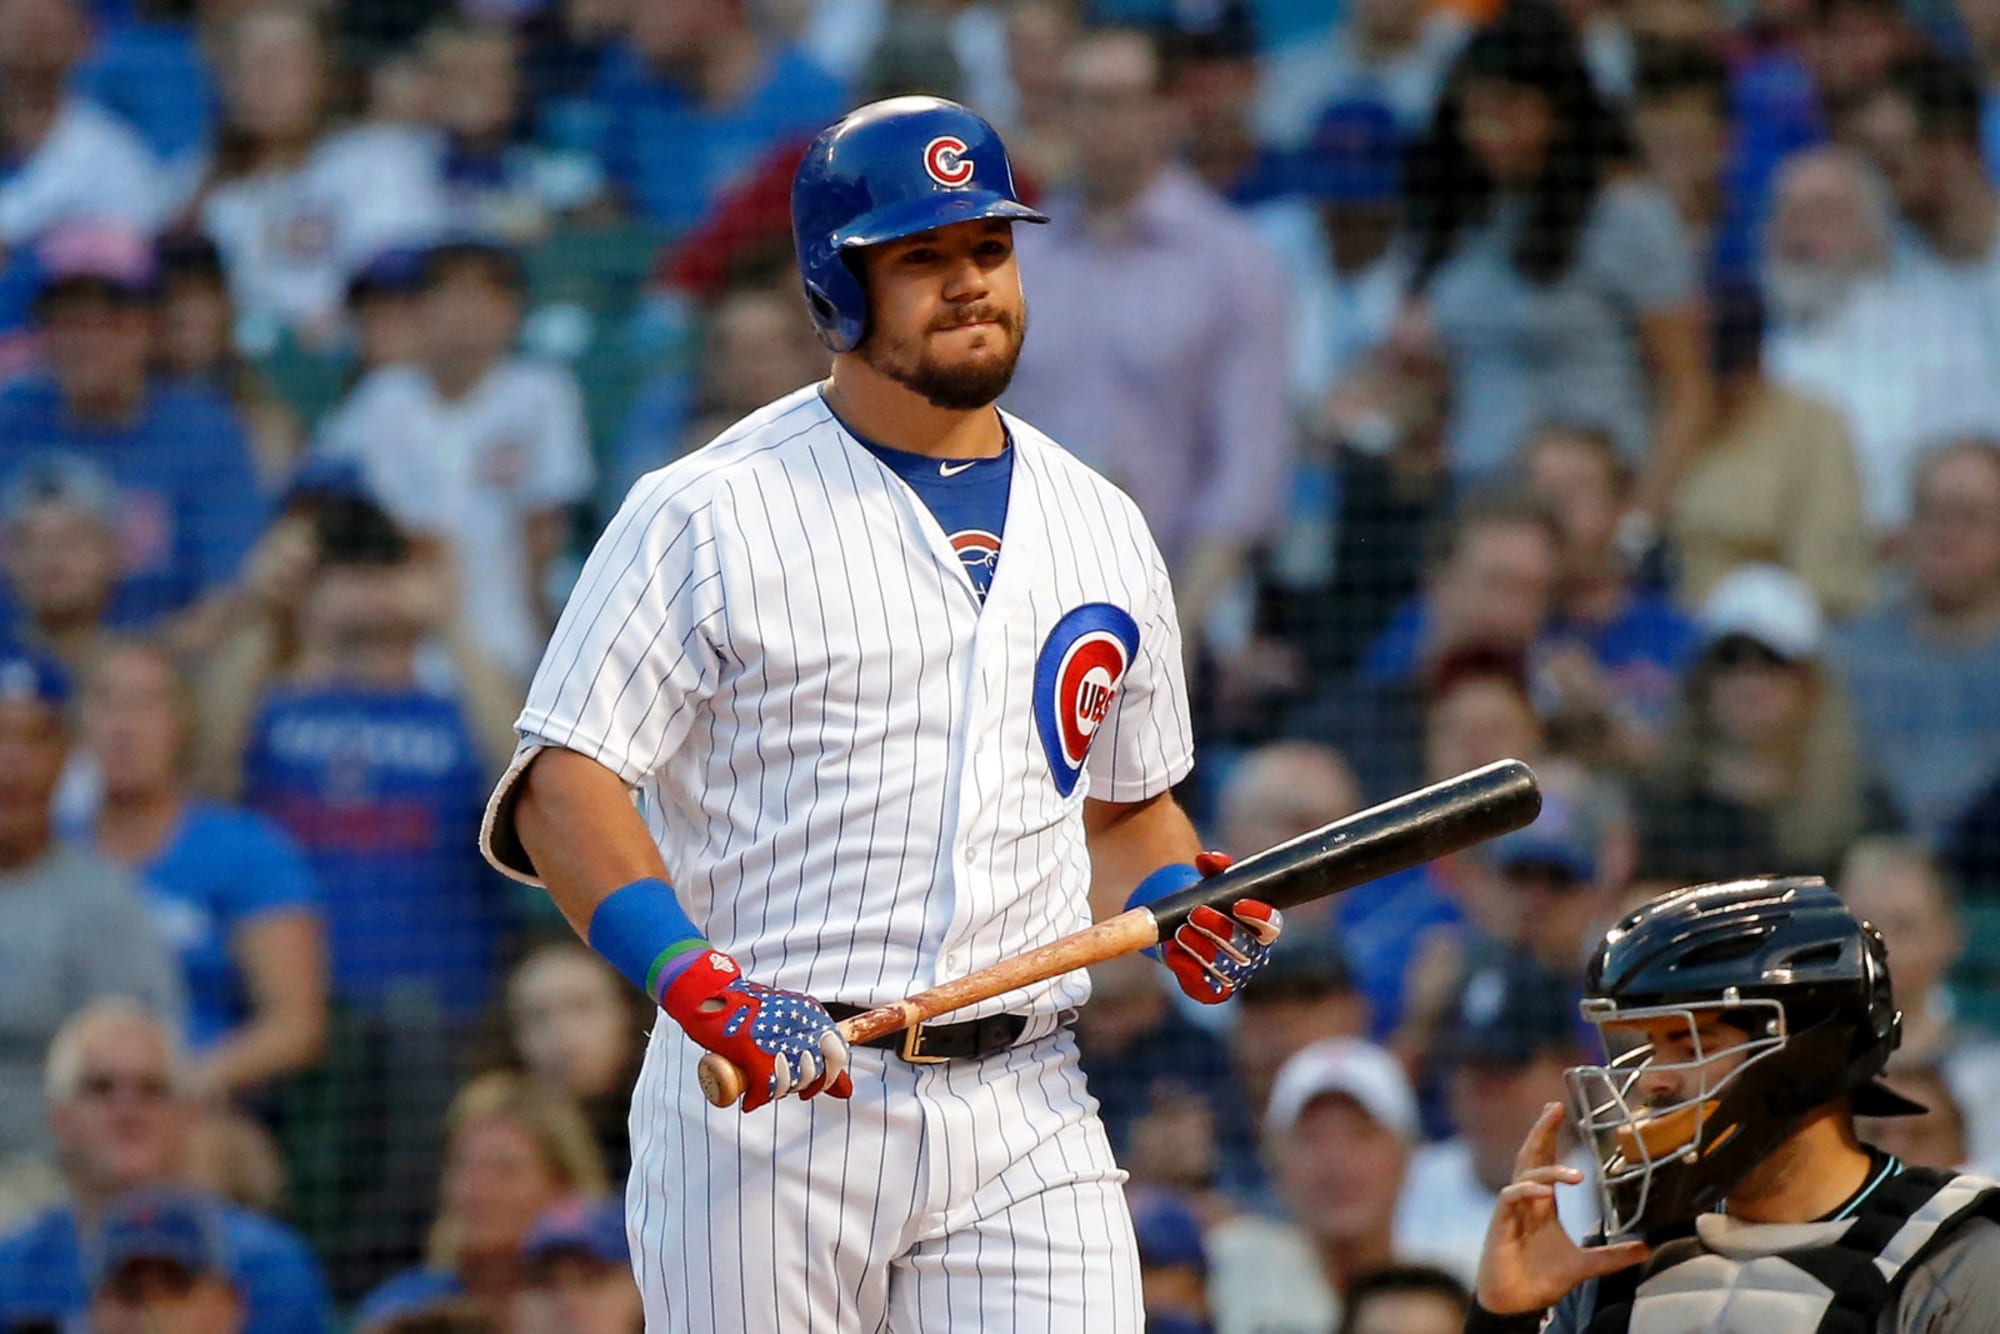 Cubs' Schwarber ready to be in left field full time